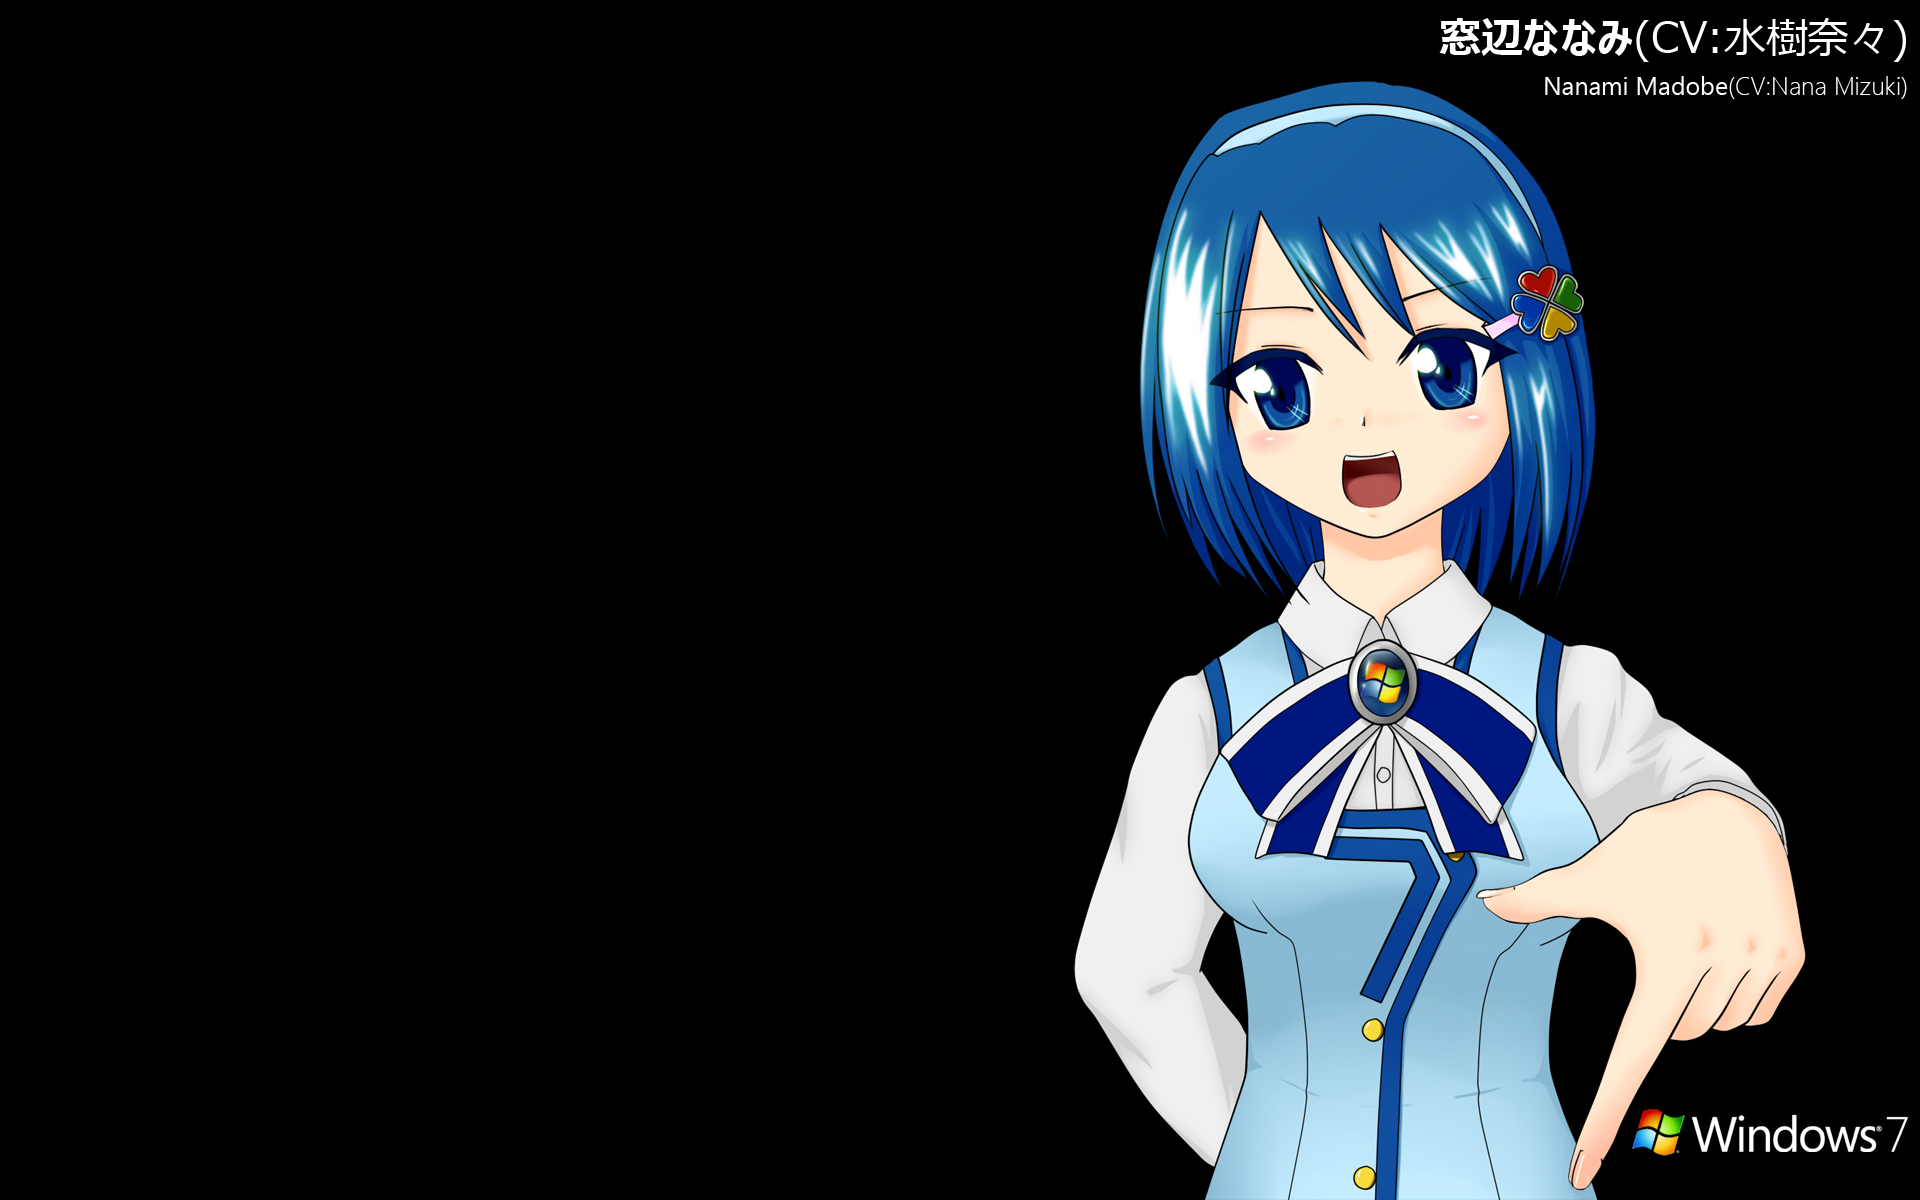 Anime-style character Os-tan in a desktop wallpaper.